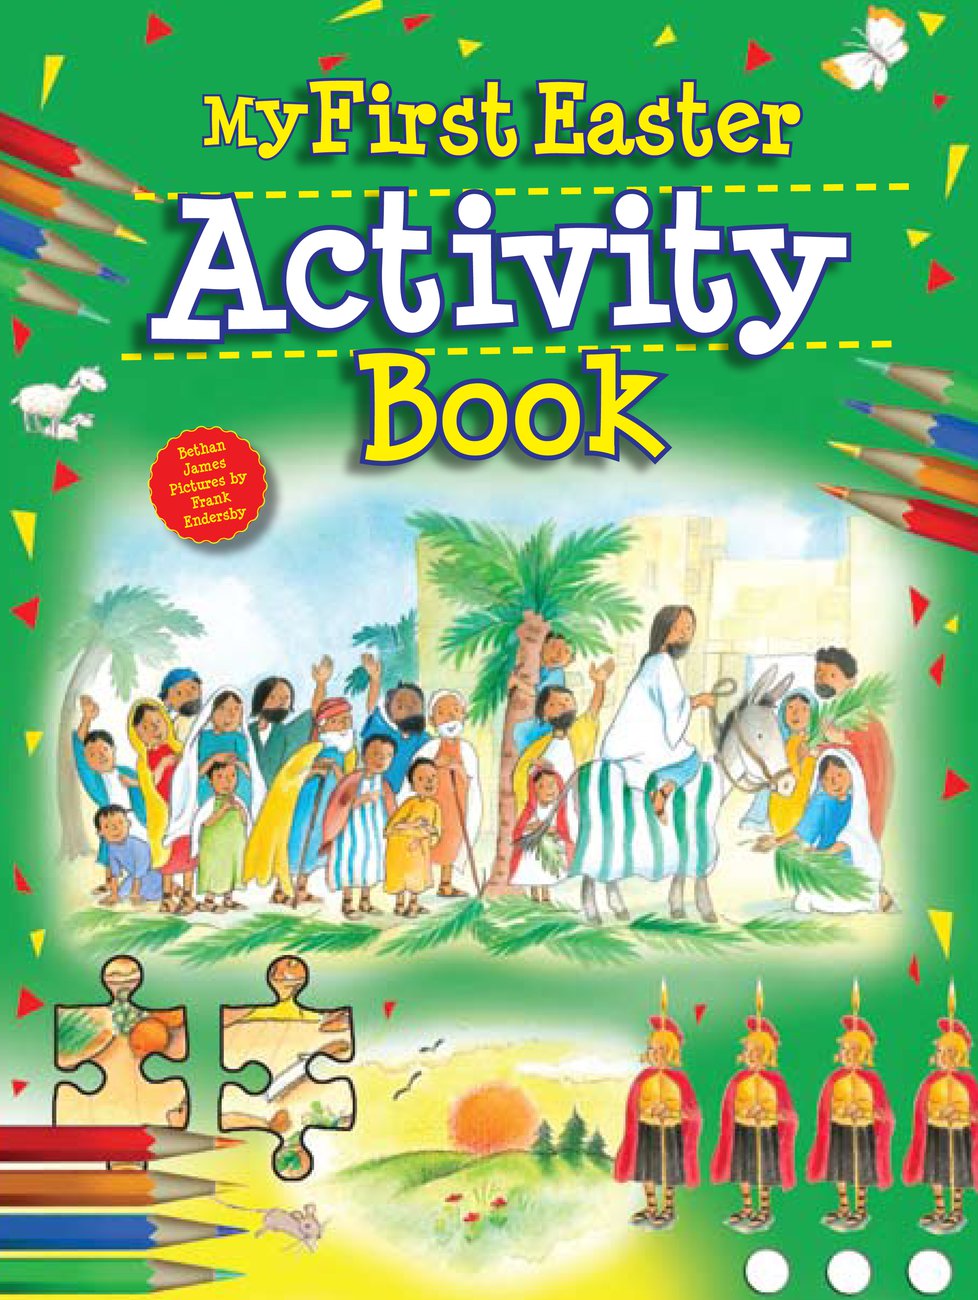 Image of My First Easter Activity Book other